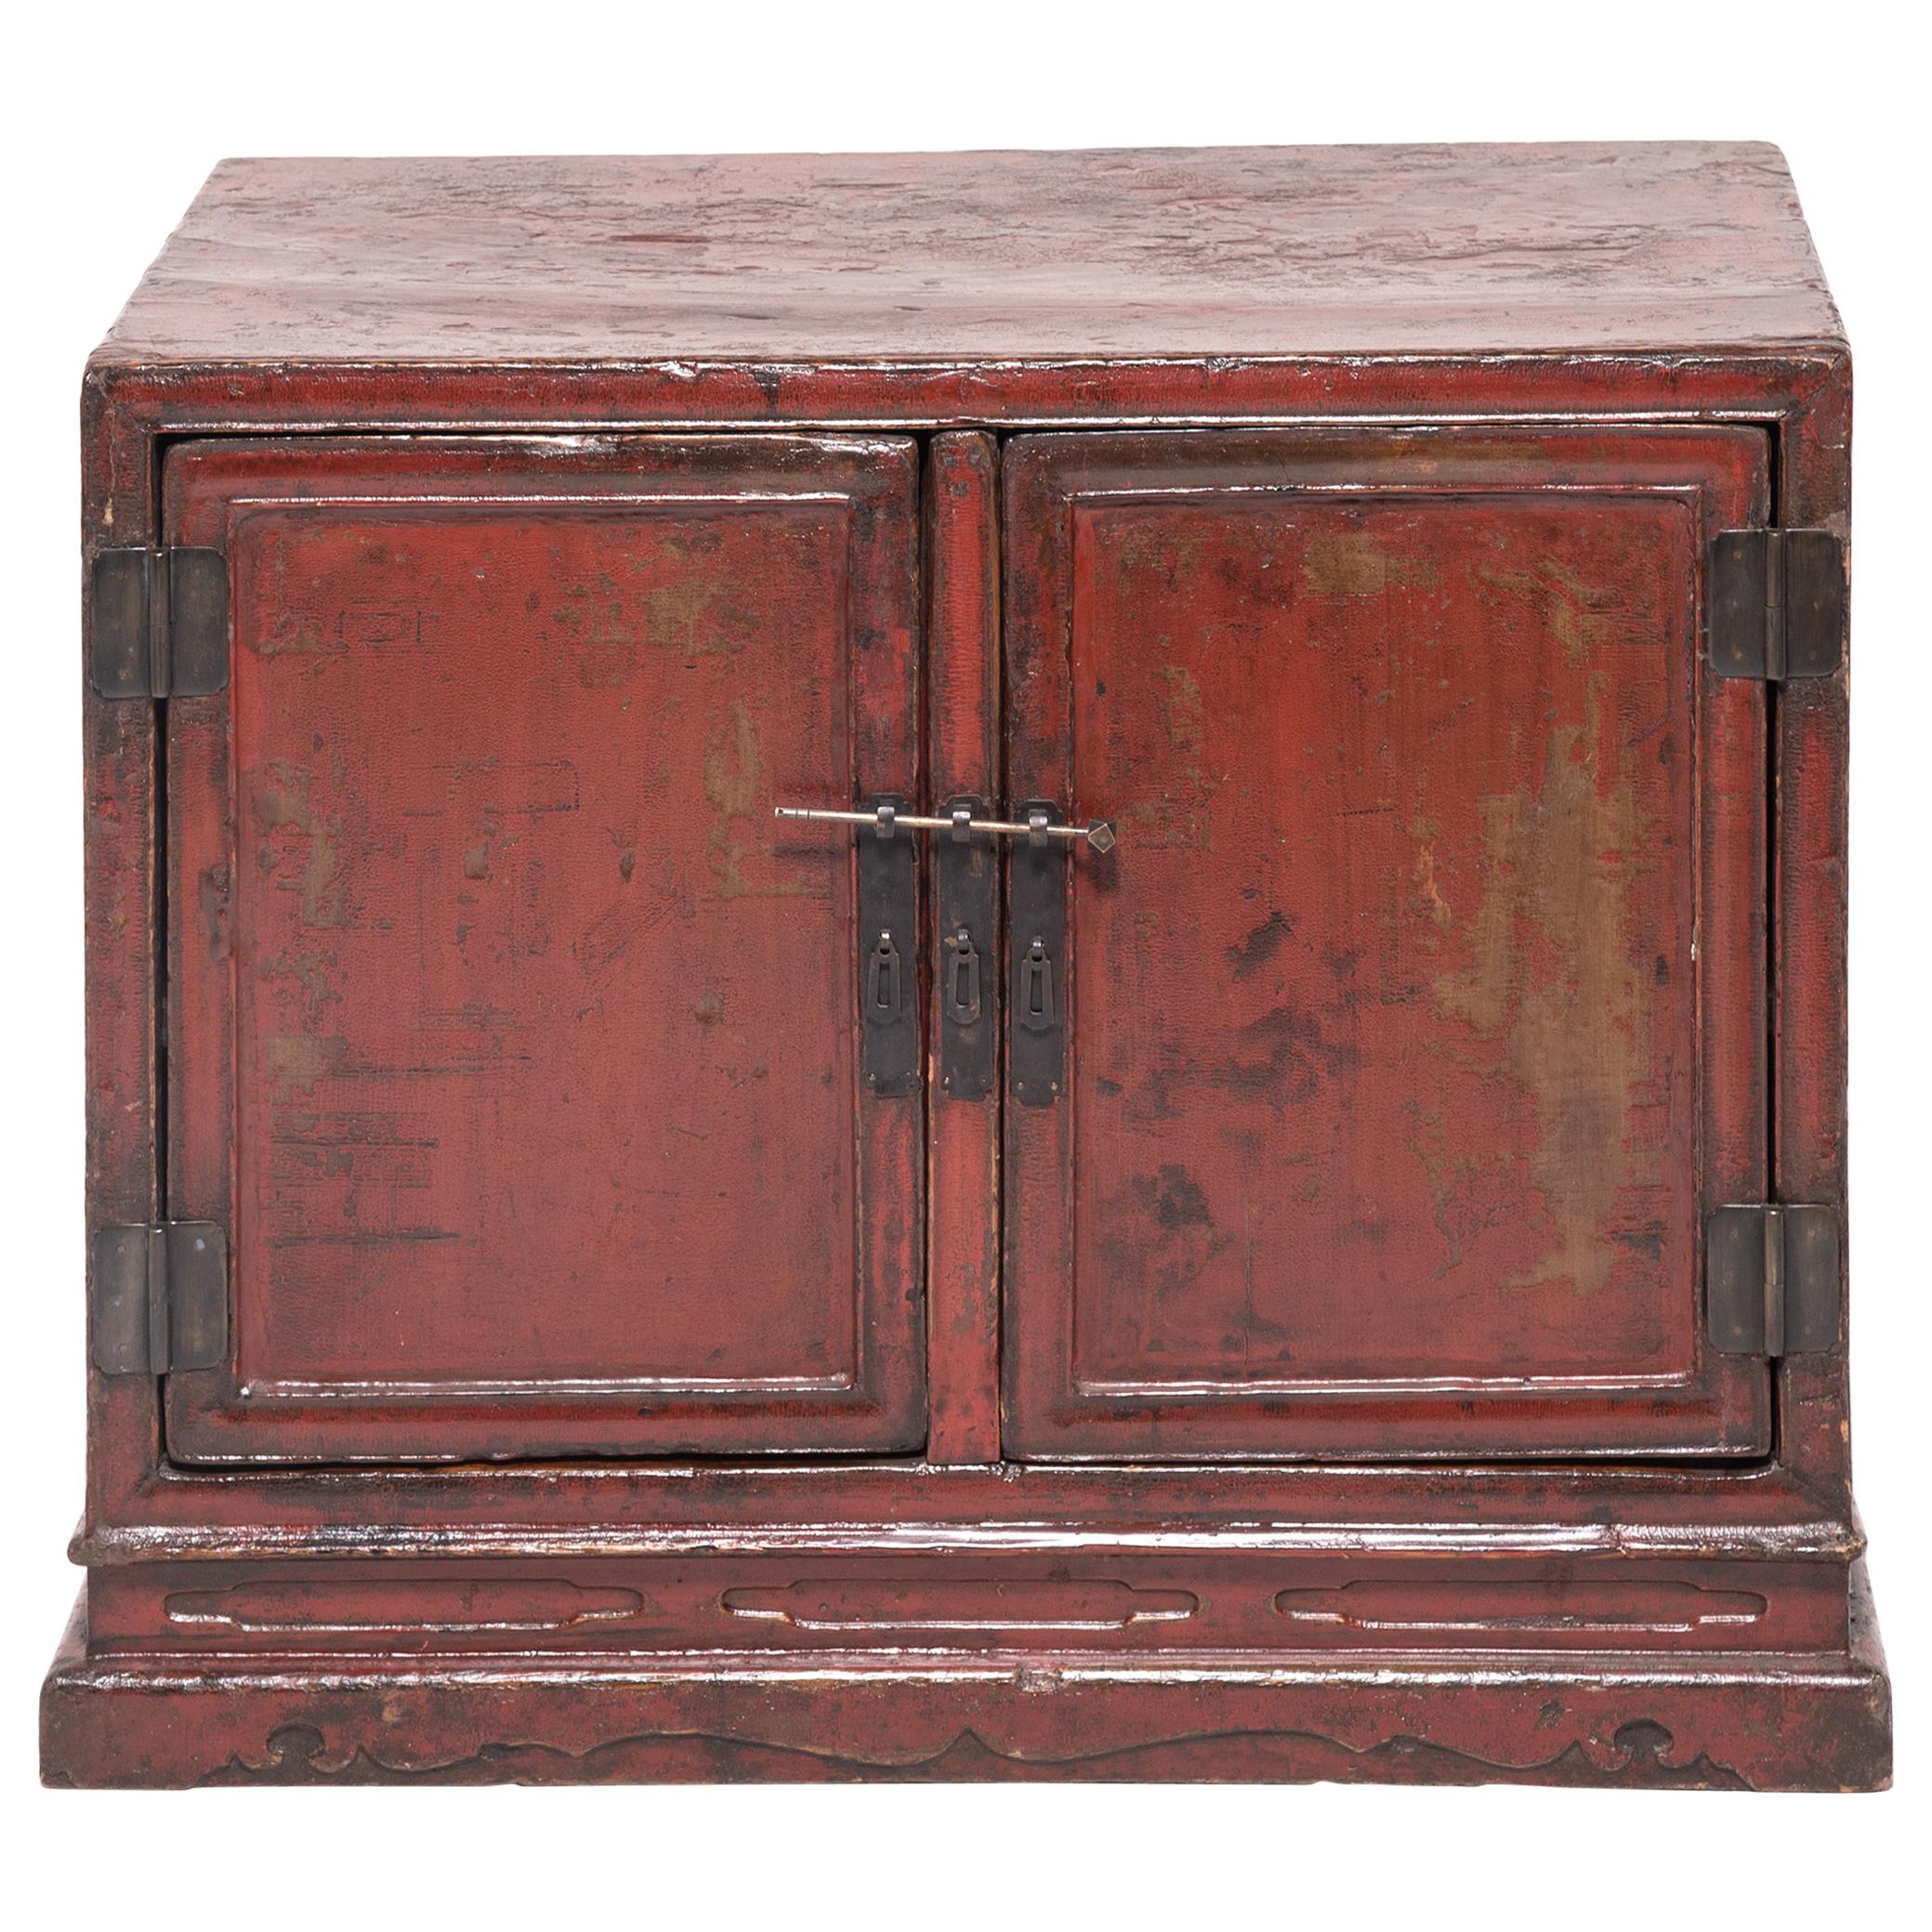 Chinese Red Lacquer Book Cabinet, c. 1700